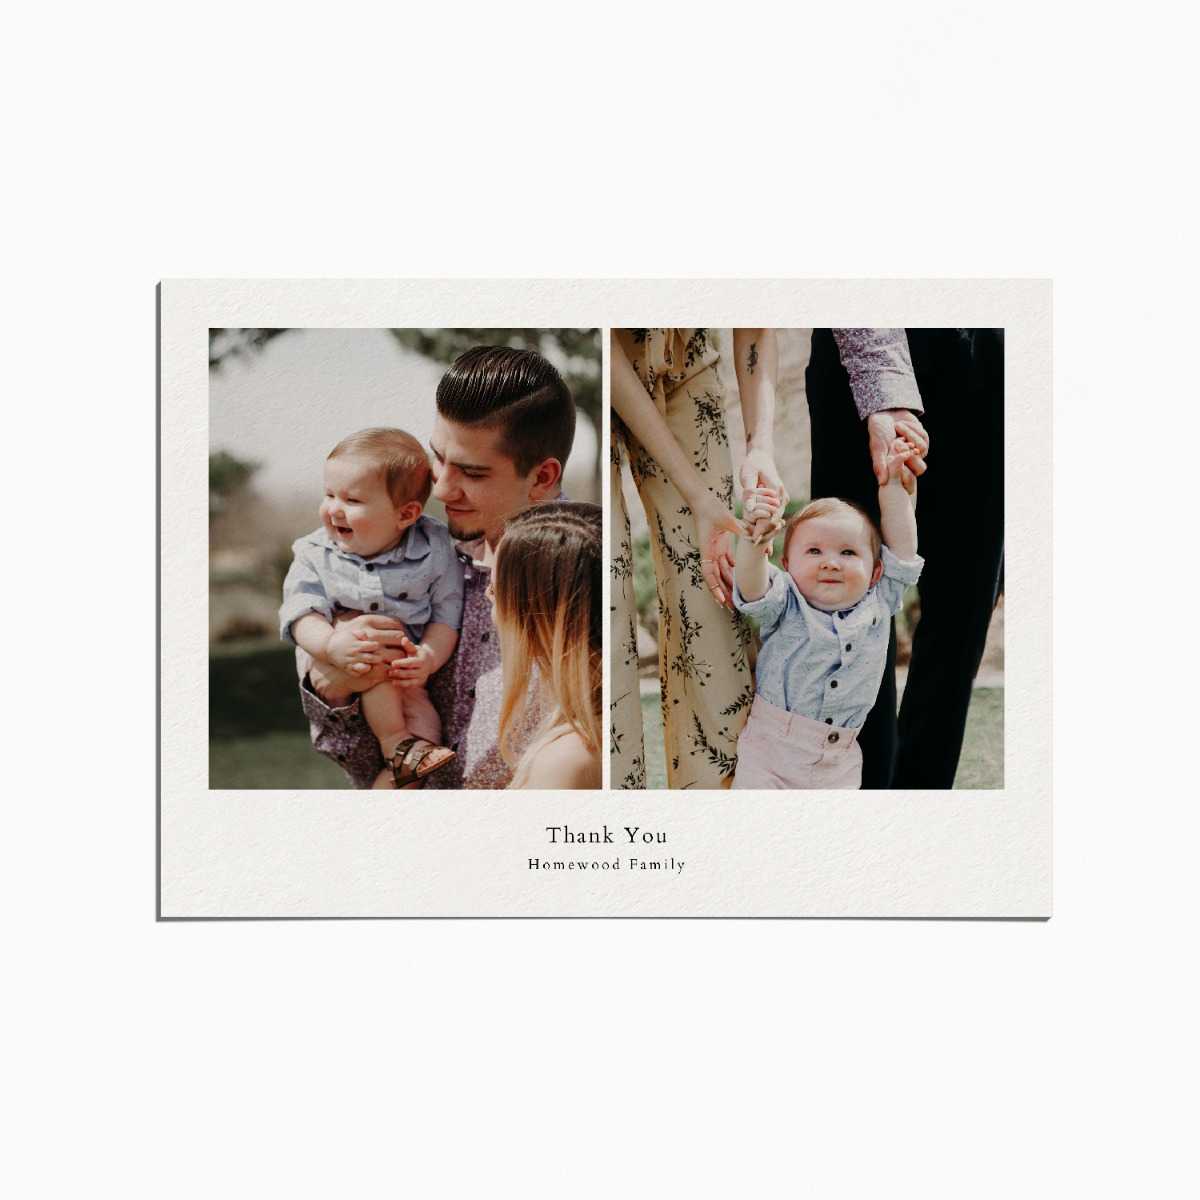 thank you card with two images of a family